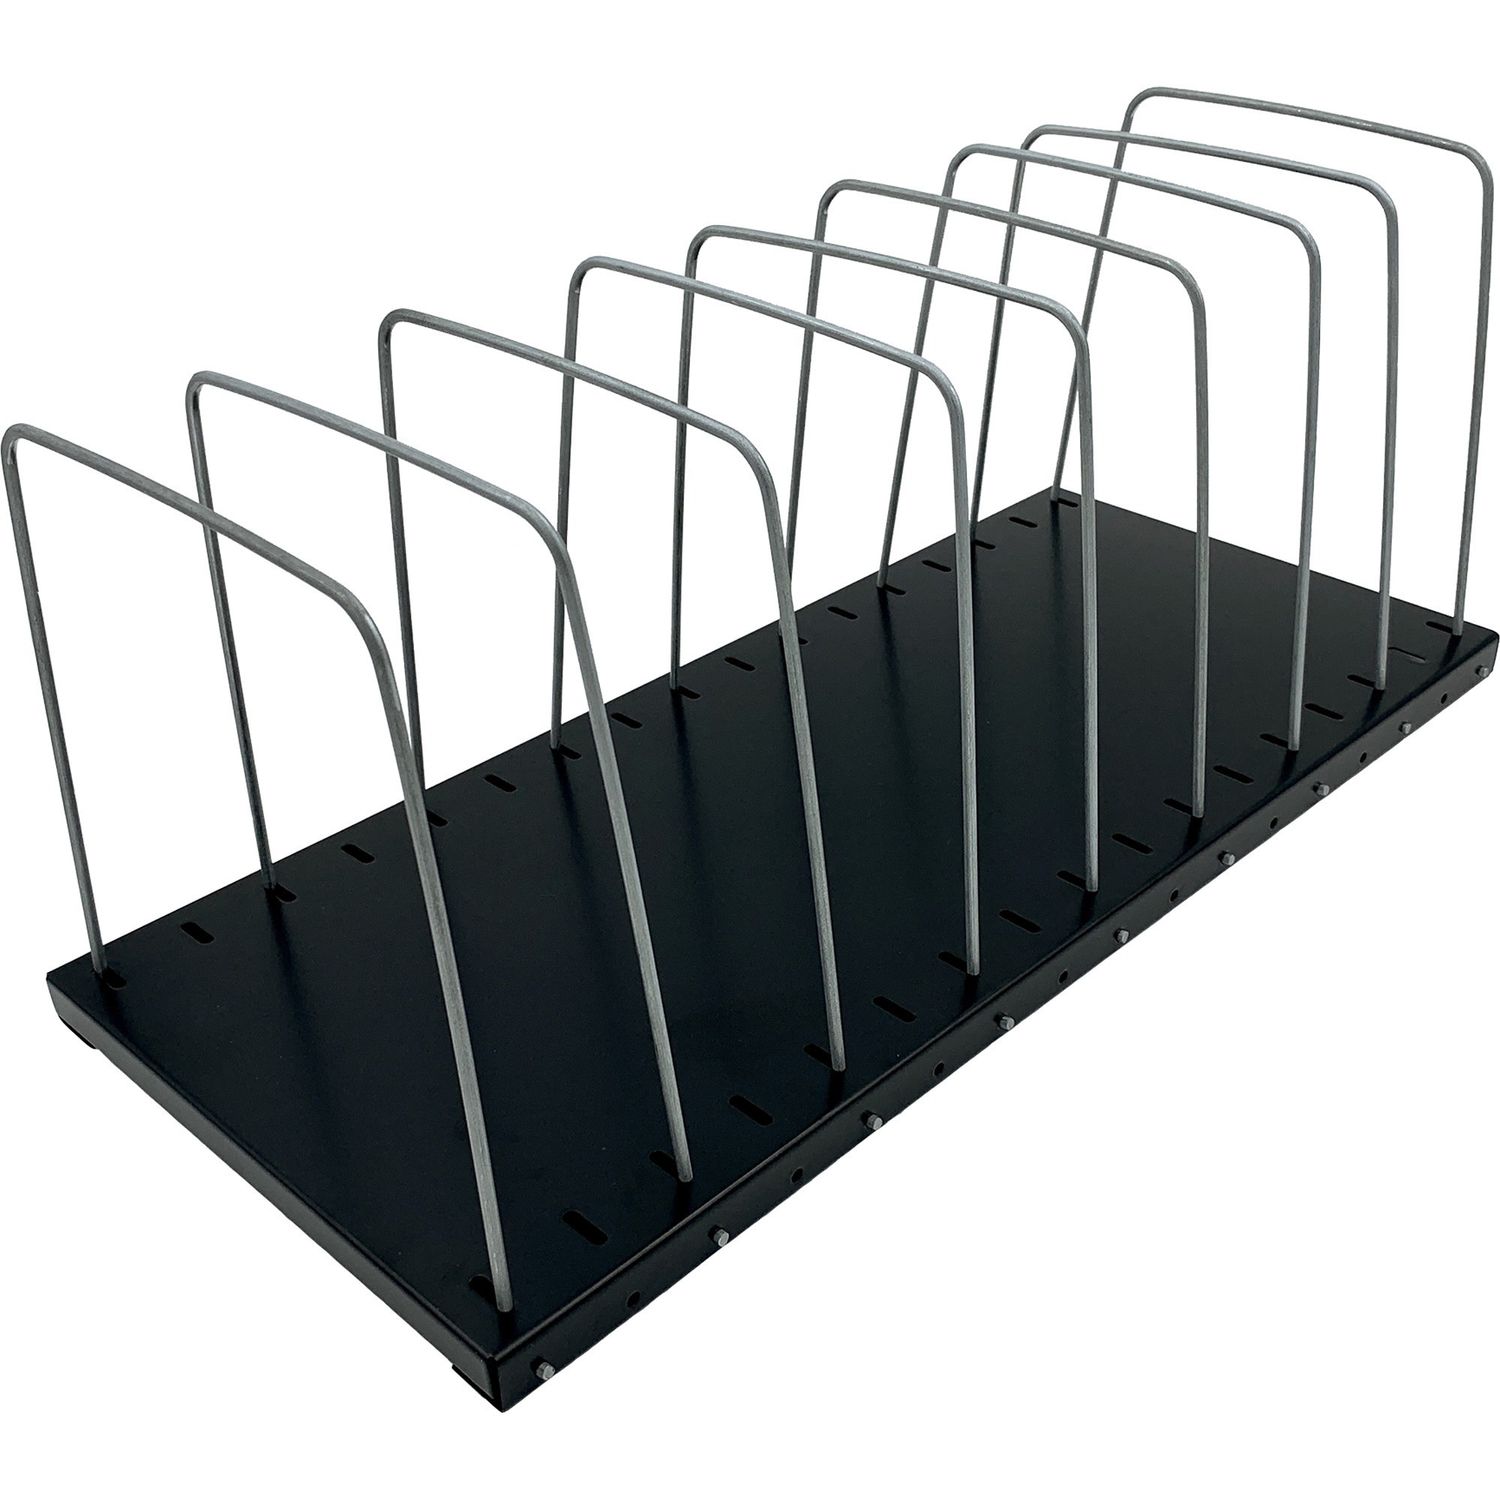 Metal Wire Vertical Slots Organizer/Sorter 8 Compartment(s), 7.5" Height x 18.3" Width x 8" Depth, 1 Each